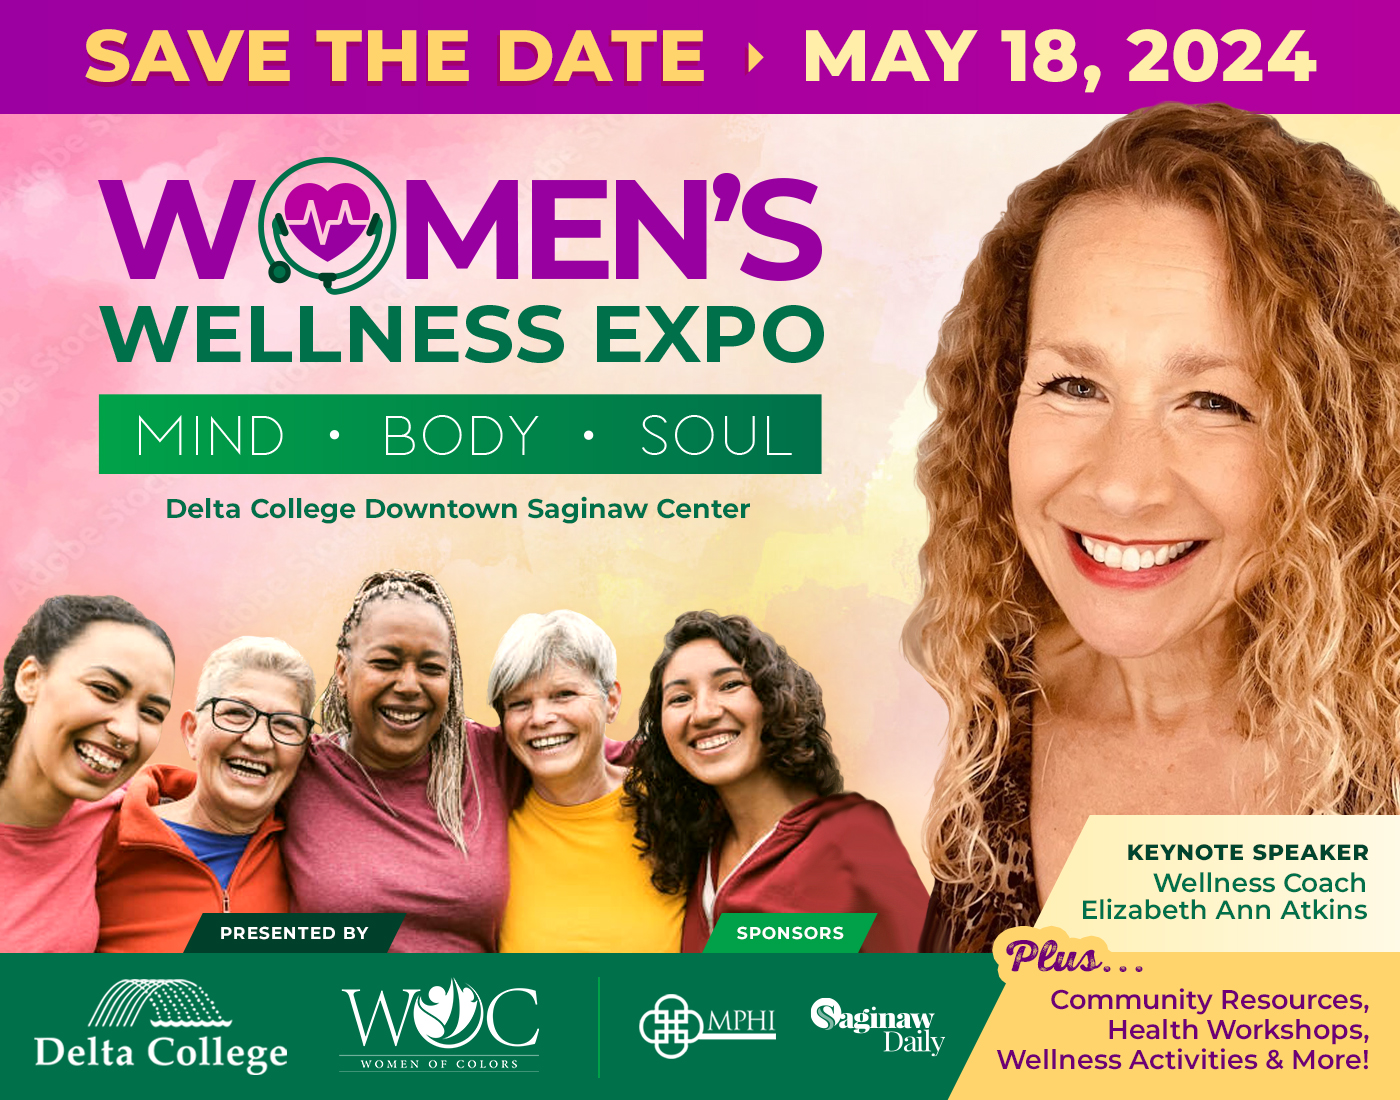 <h1 class="tribe-events-single-event-title">Women’s Wellness Expo</h1>